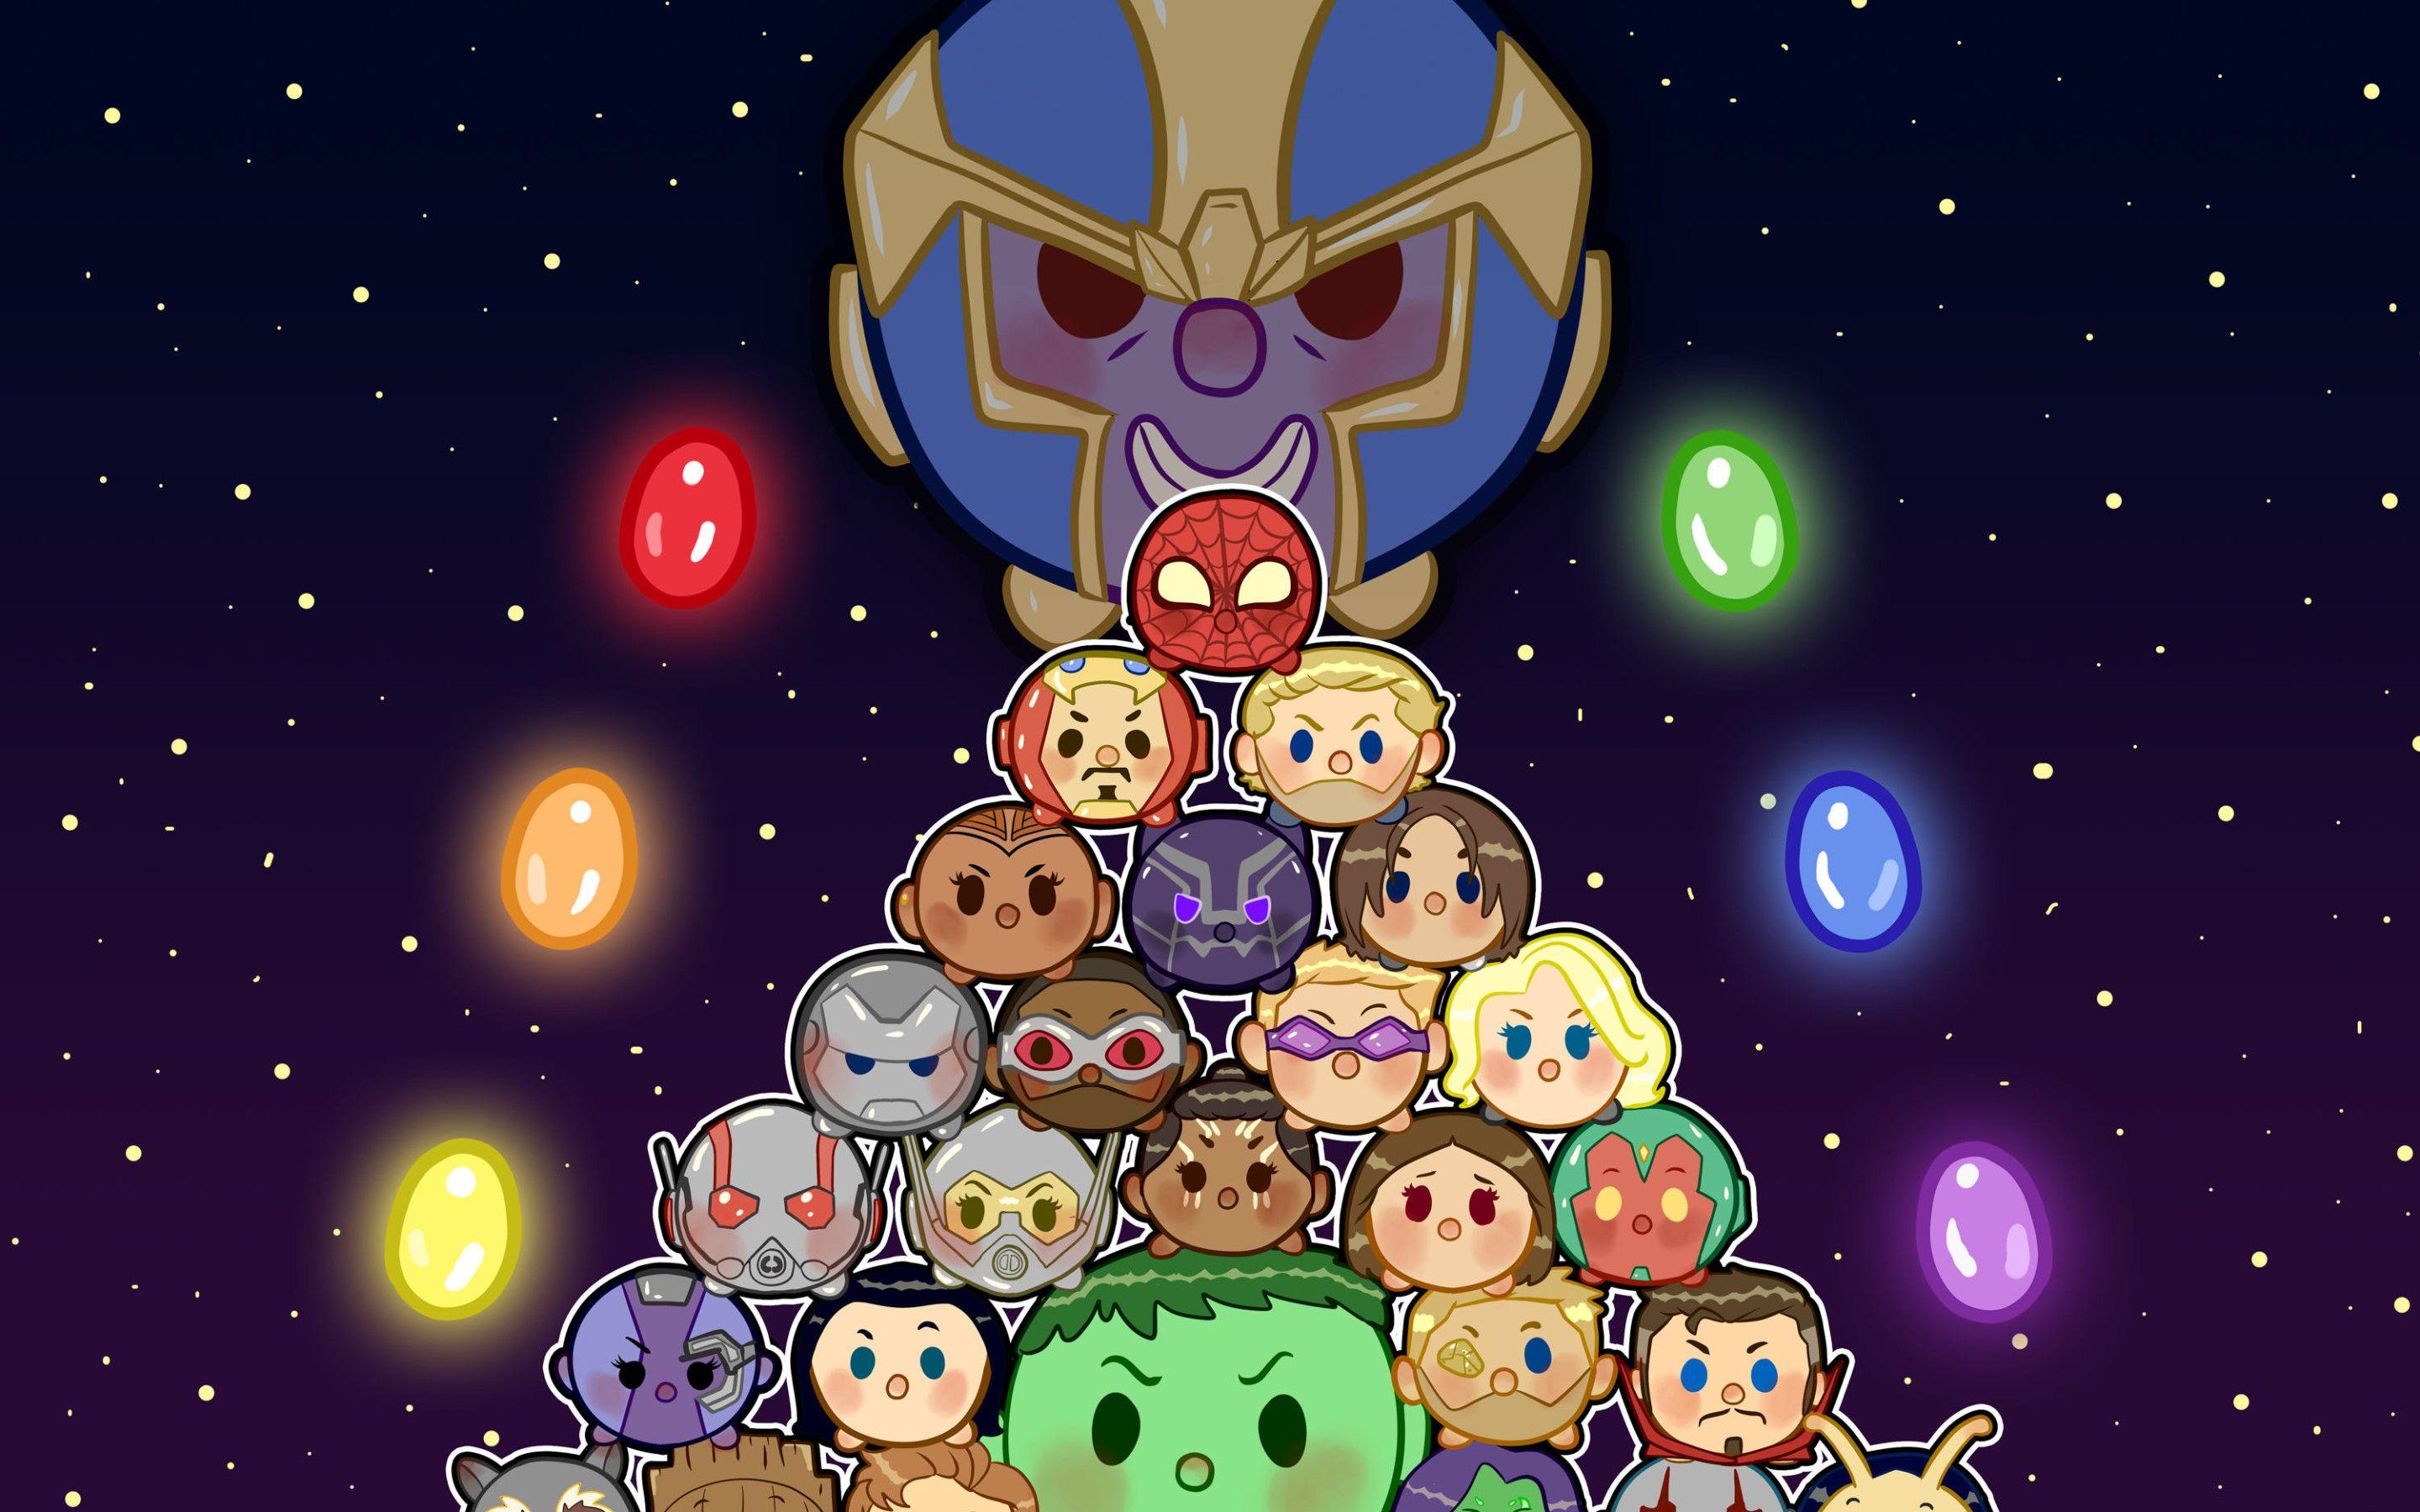 100+] Cute Marvel Wallpapers | Wallpapers.com